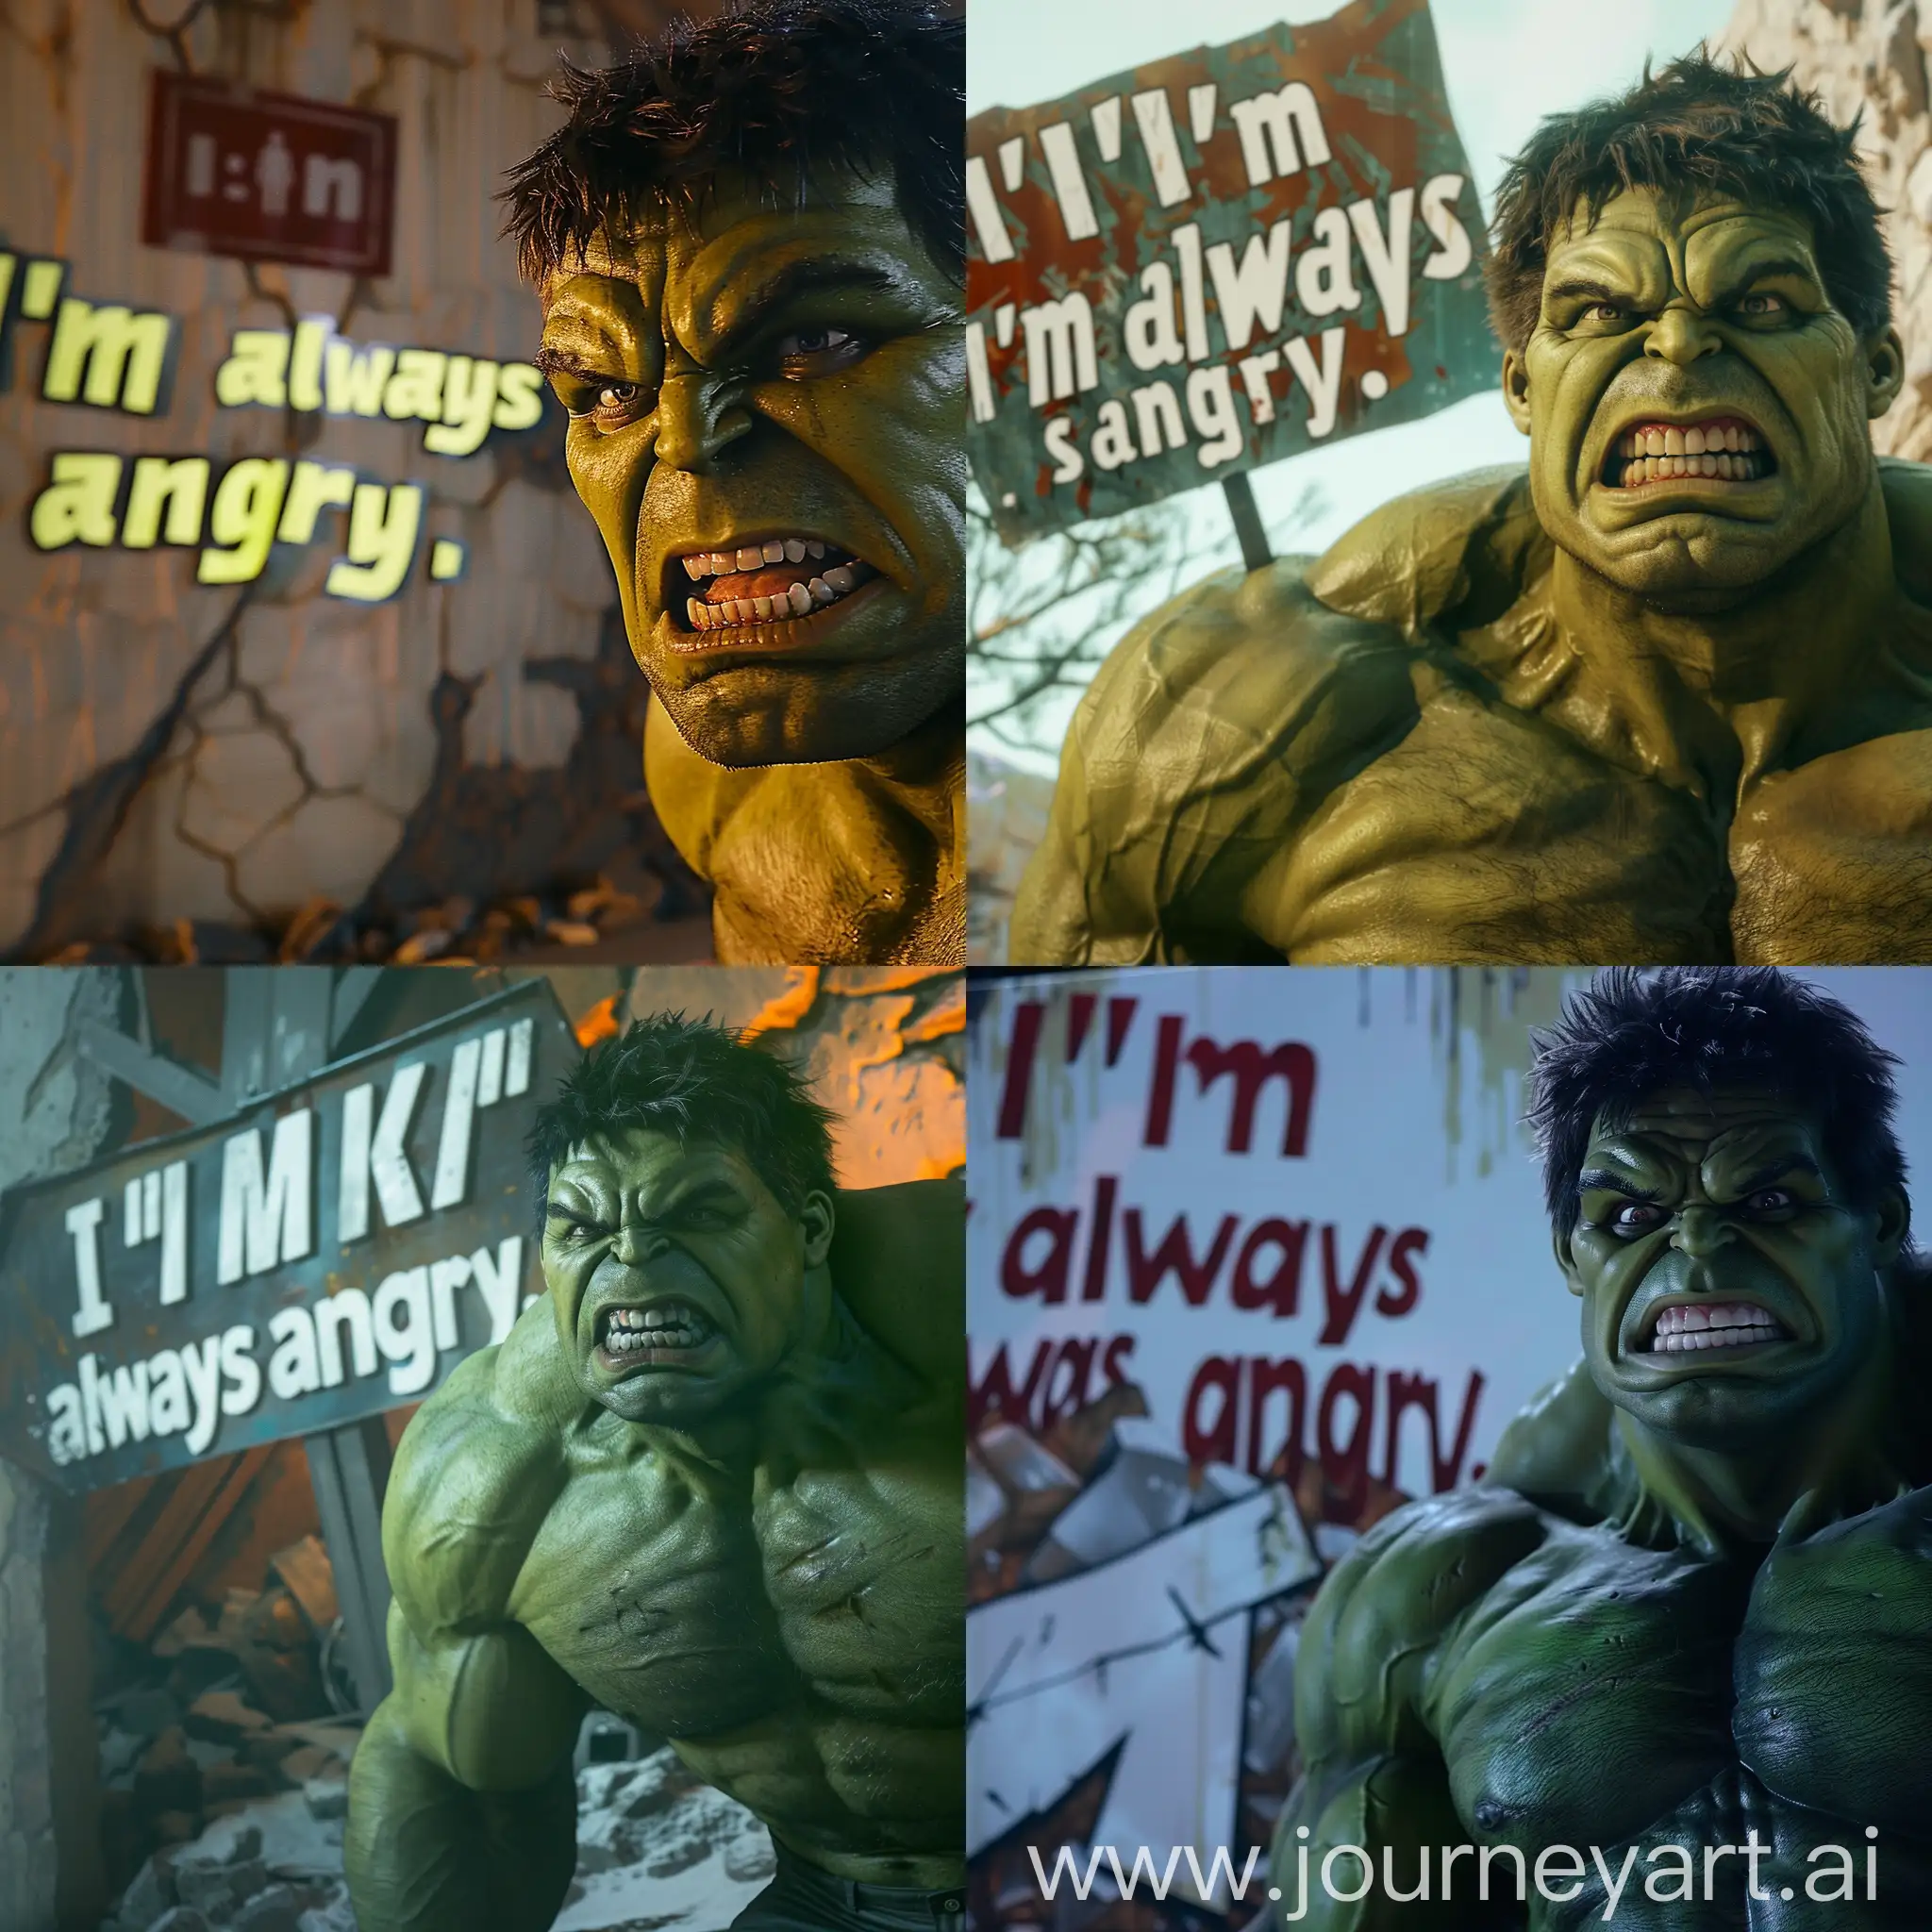 Cinematic shot of the Hulk with a sign in the background saying, “I’m always angry.”